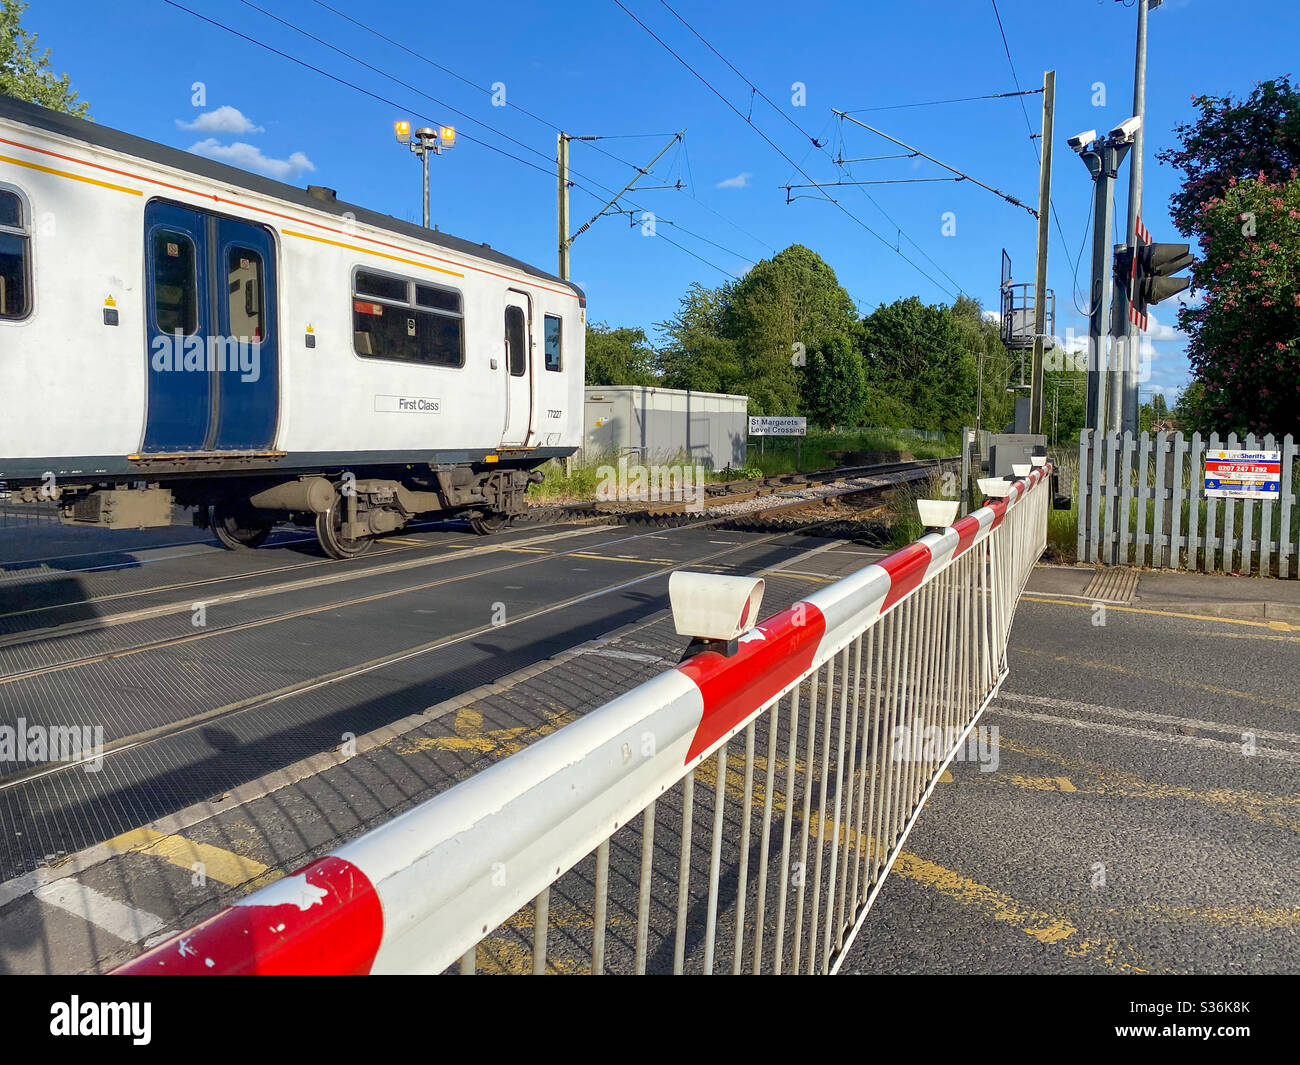 Commuter train in the countryside Stock Photo